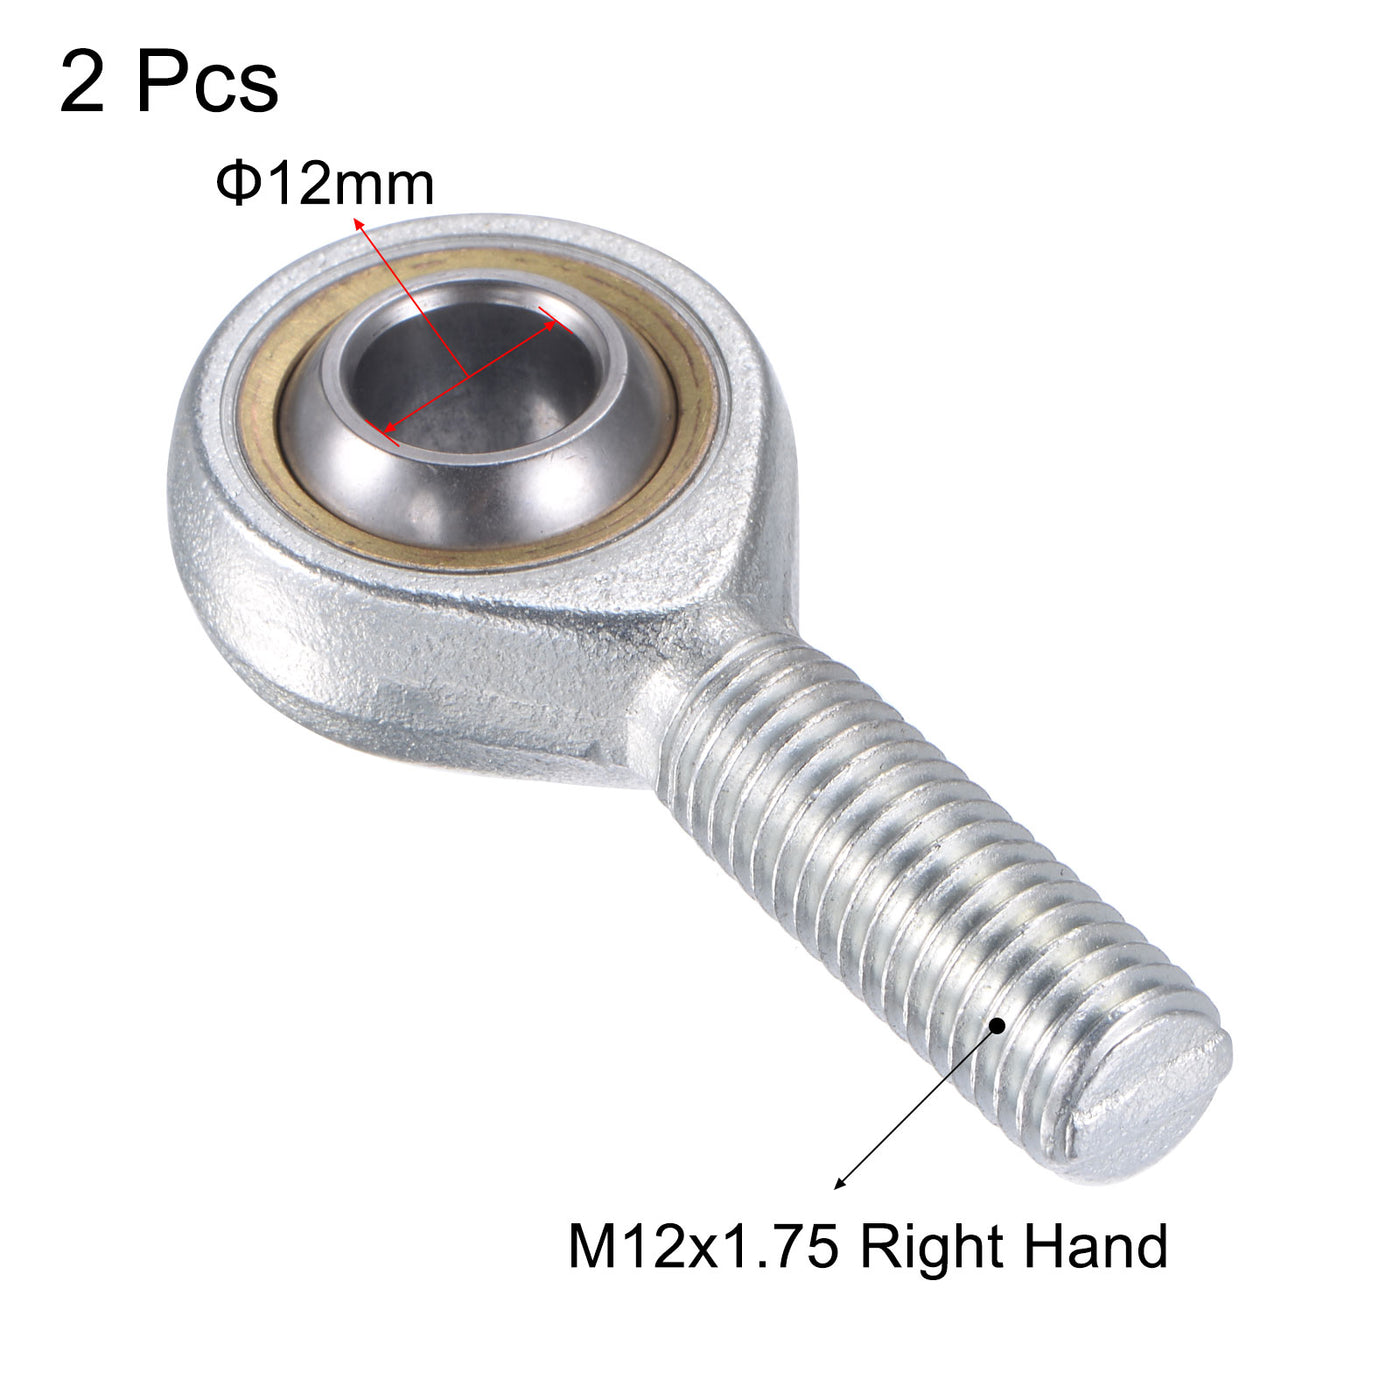 uxcell Uxcell 2pcs SA12TK POSA12 Rod End Bearing 12mm Bore M12x1.75 Right Hand Male Thread